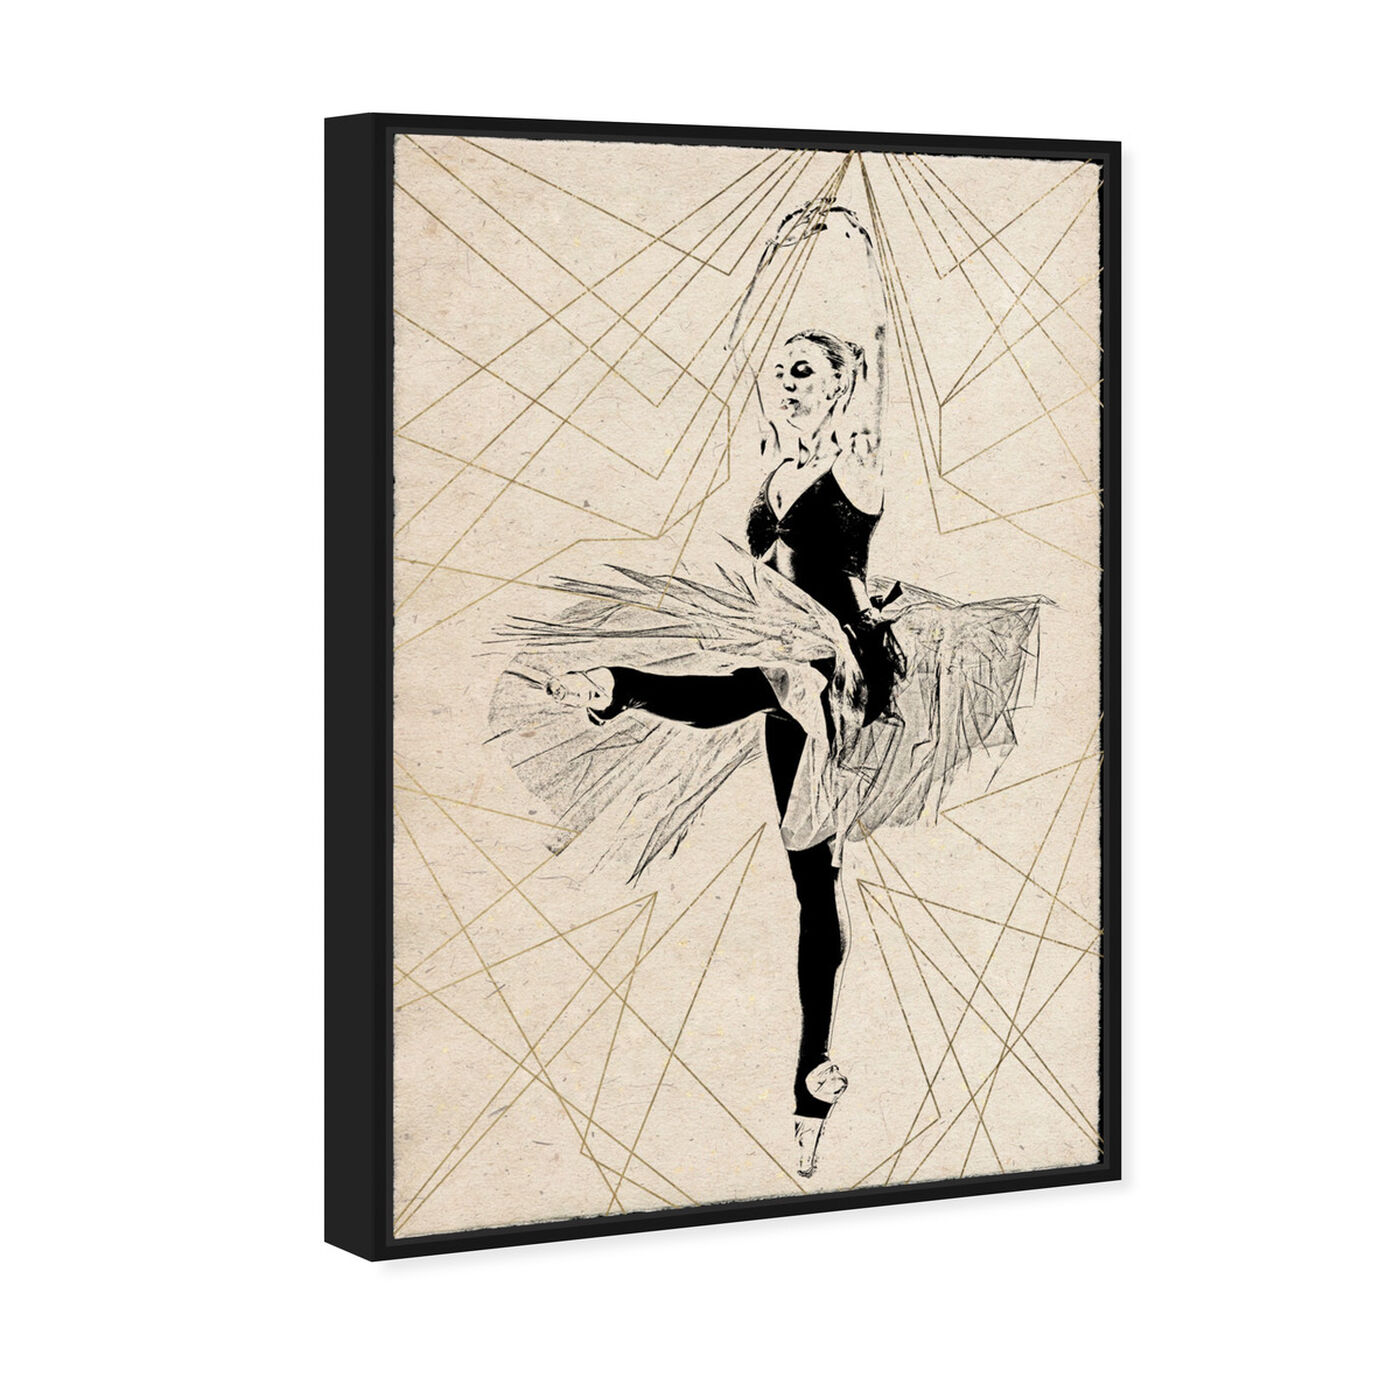 Angled view of Ballet II Print featuring sports and teams and ballet art.